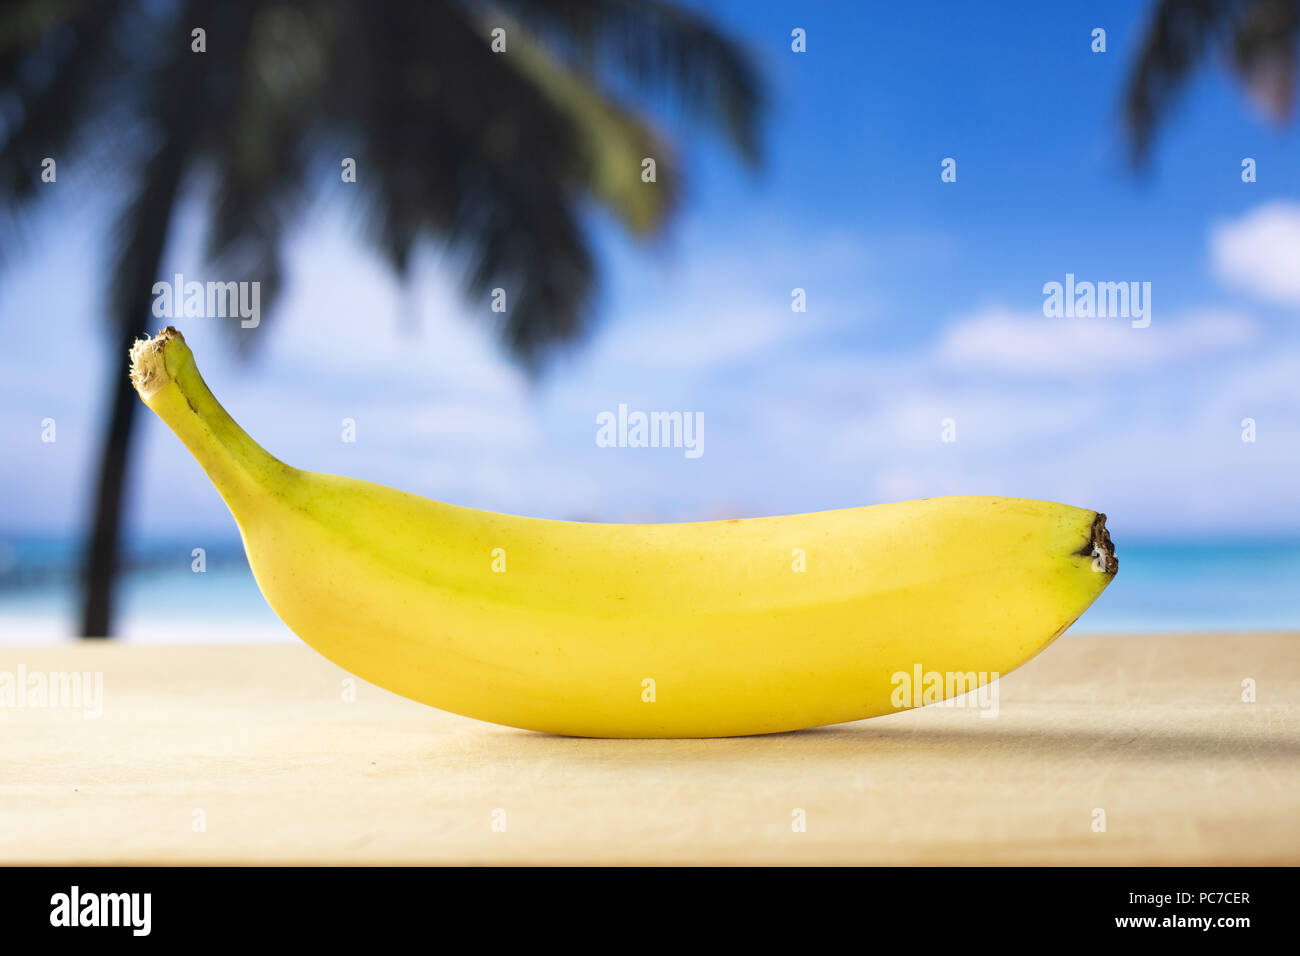 One whole fresh yellow banana with palm trees on the beach in background Stock Photo